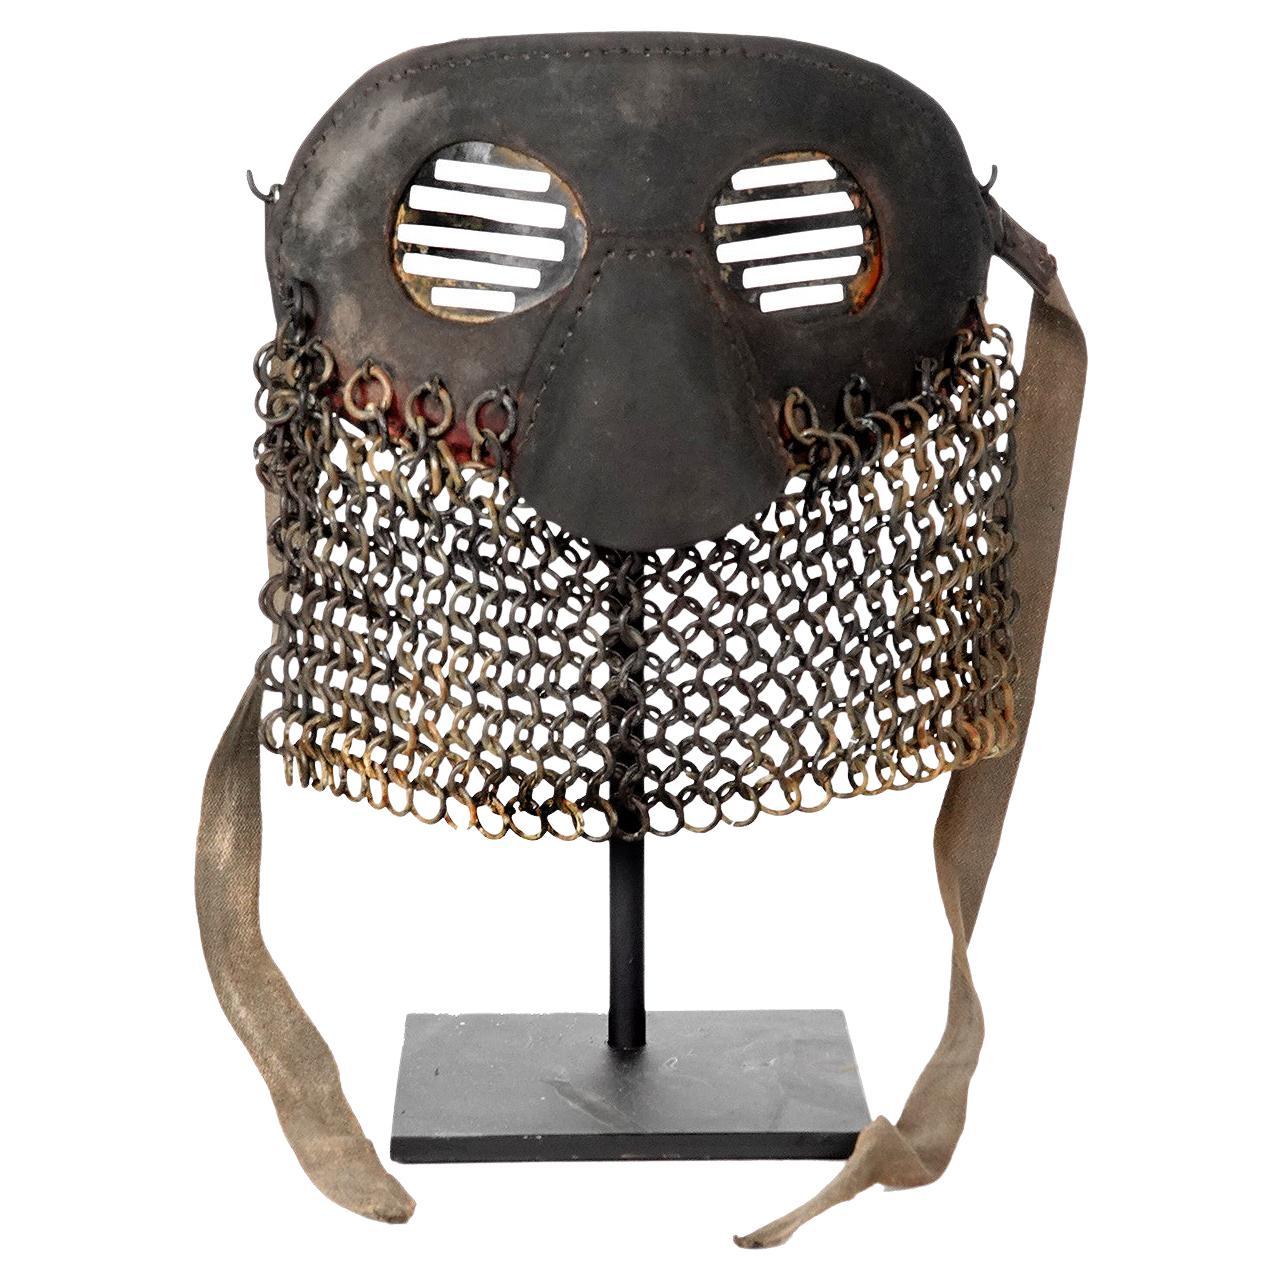 Rare WWI Leather, Chain Mail Tank Crew Splatter Mask